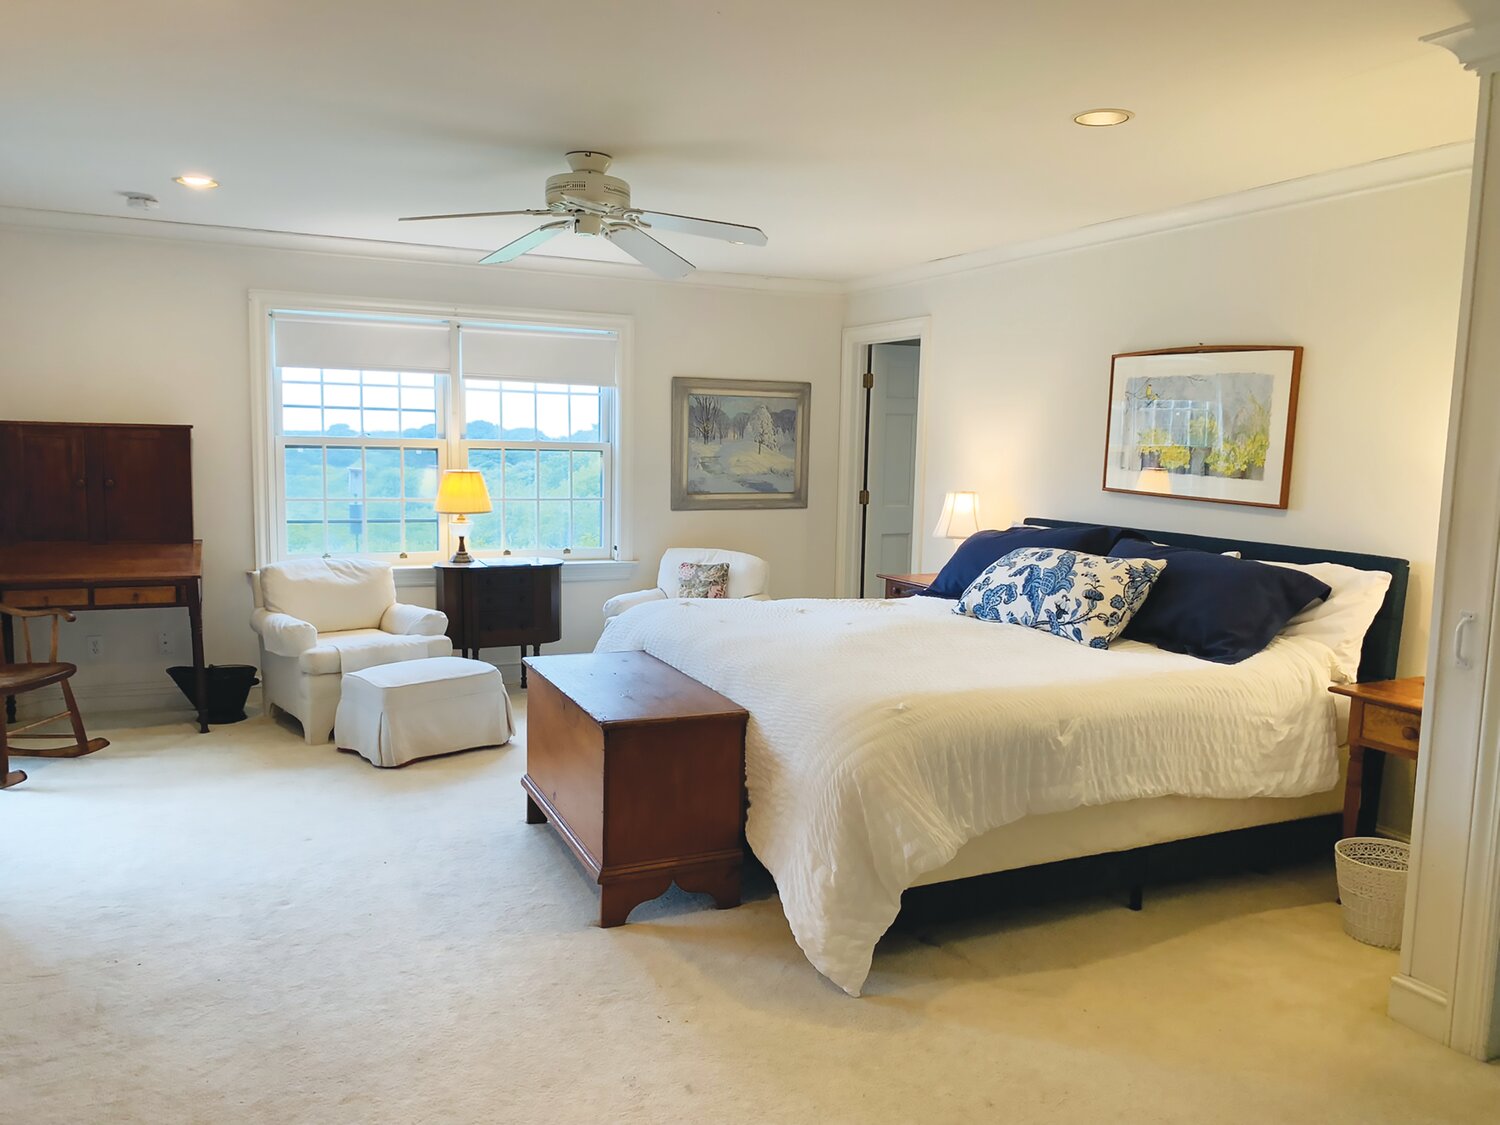 This carpeted bedroom in the main house has a ceiling fan and recessed lighting.